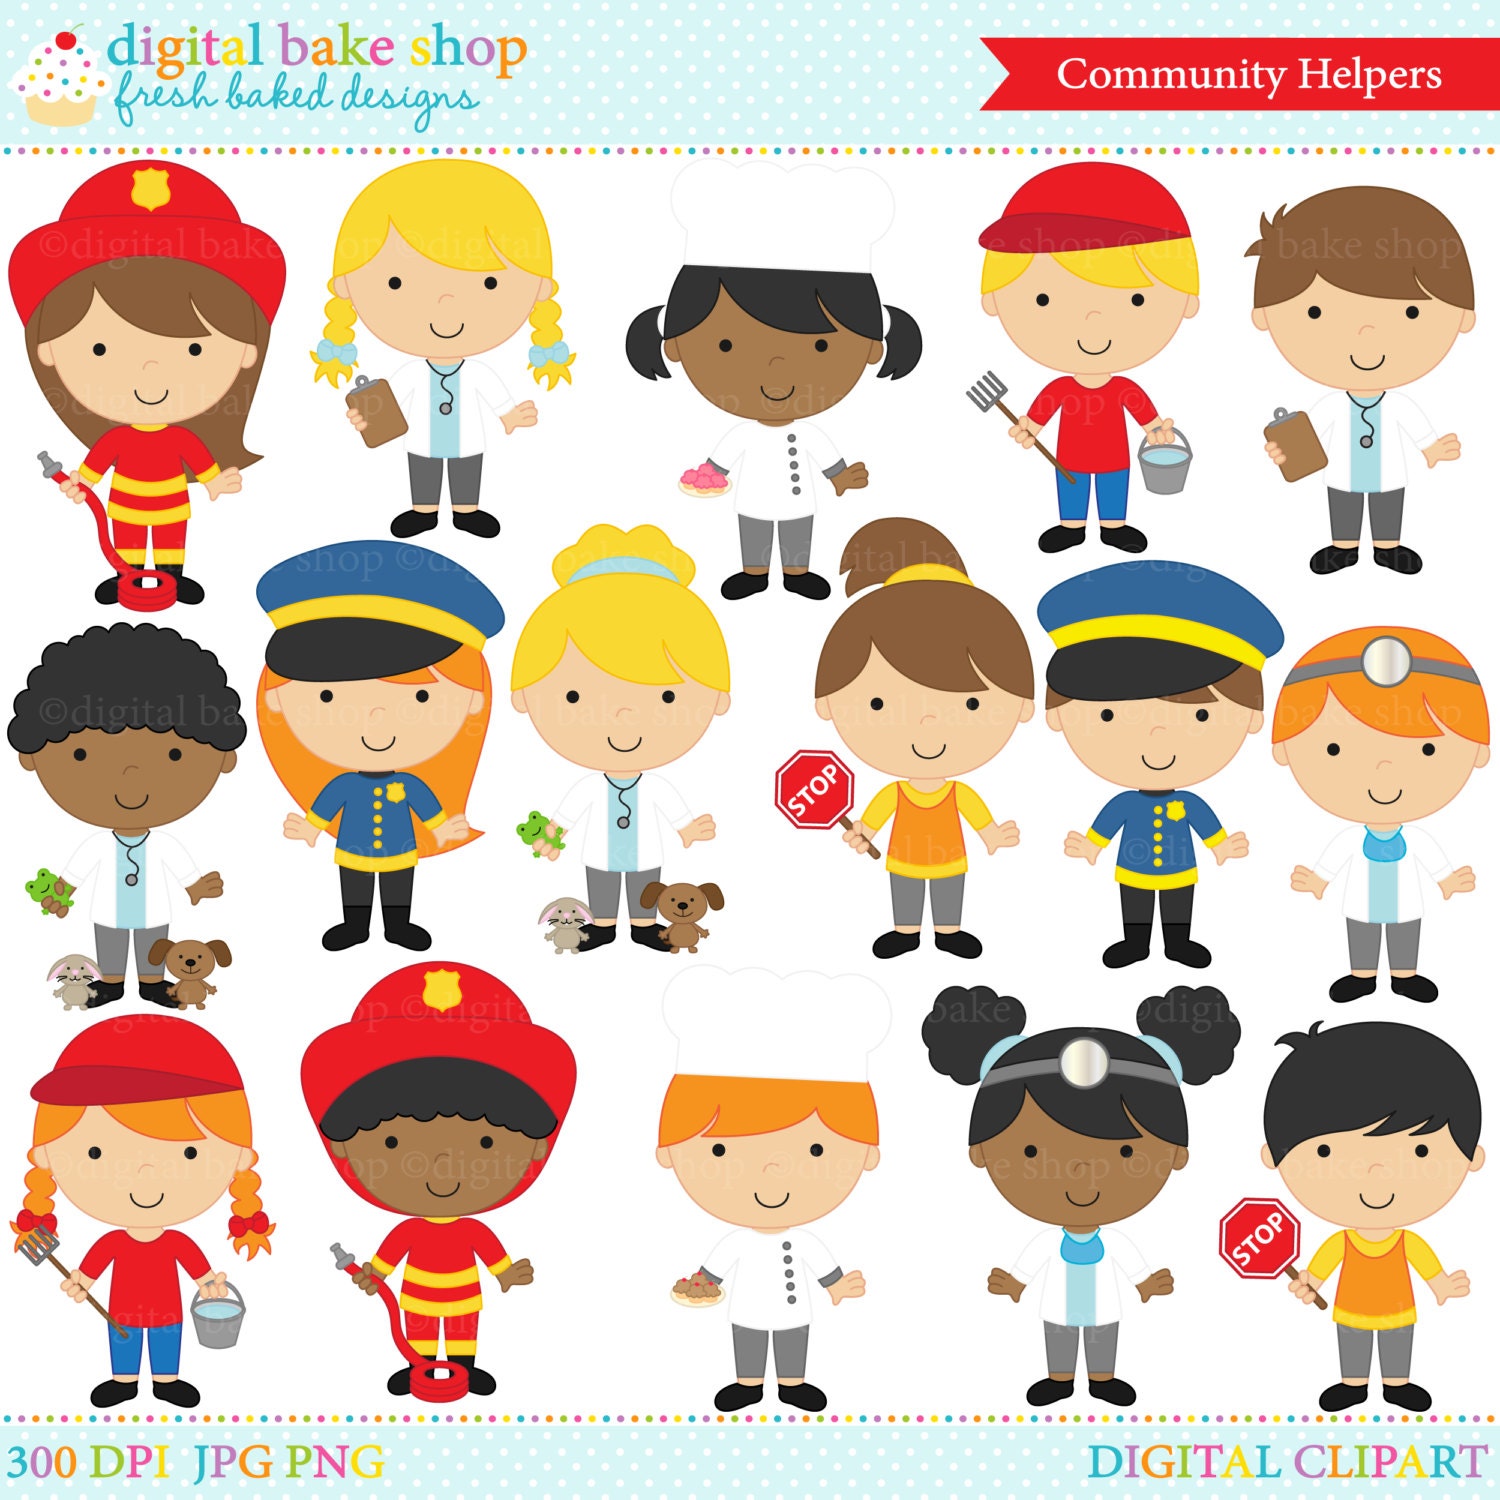 community workers clipart - photo #16